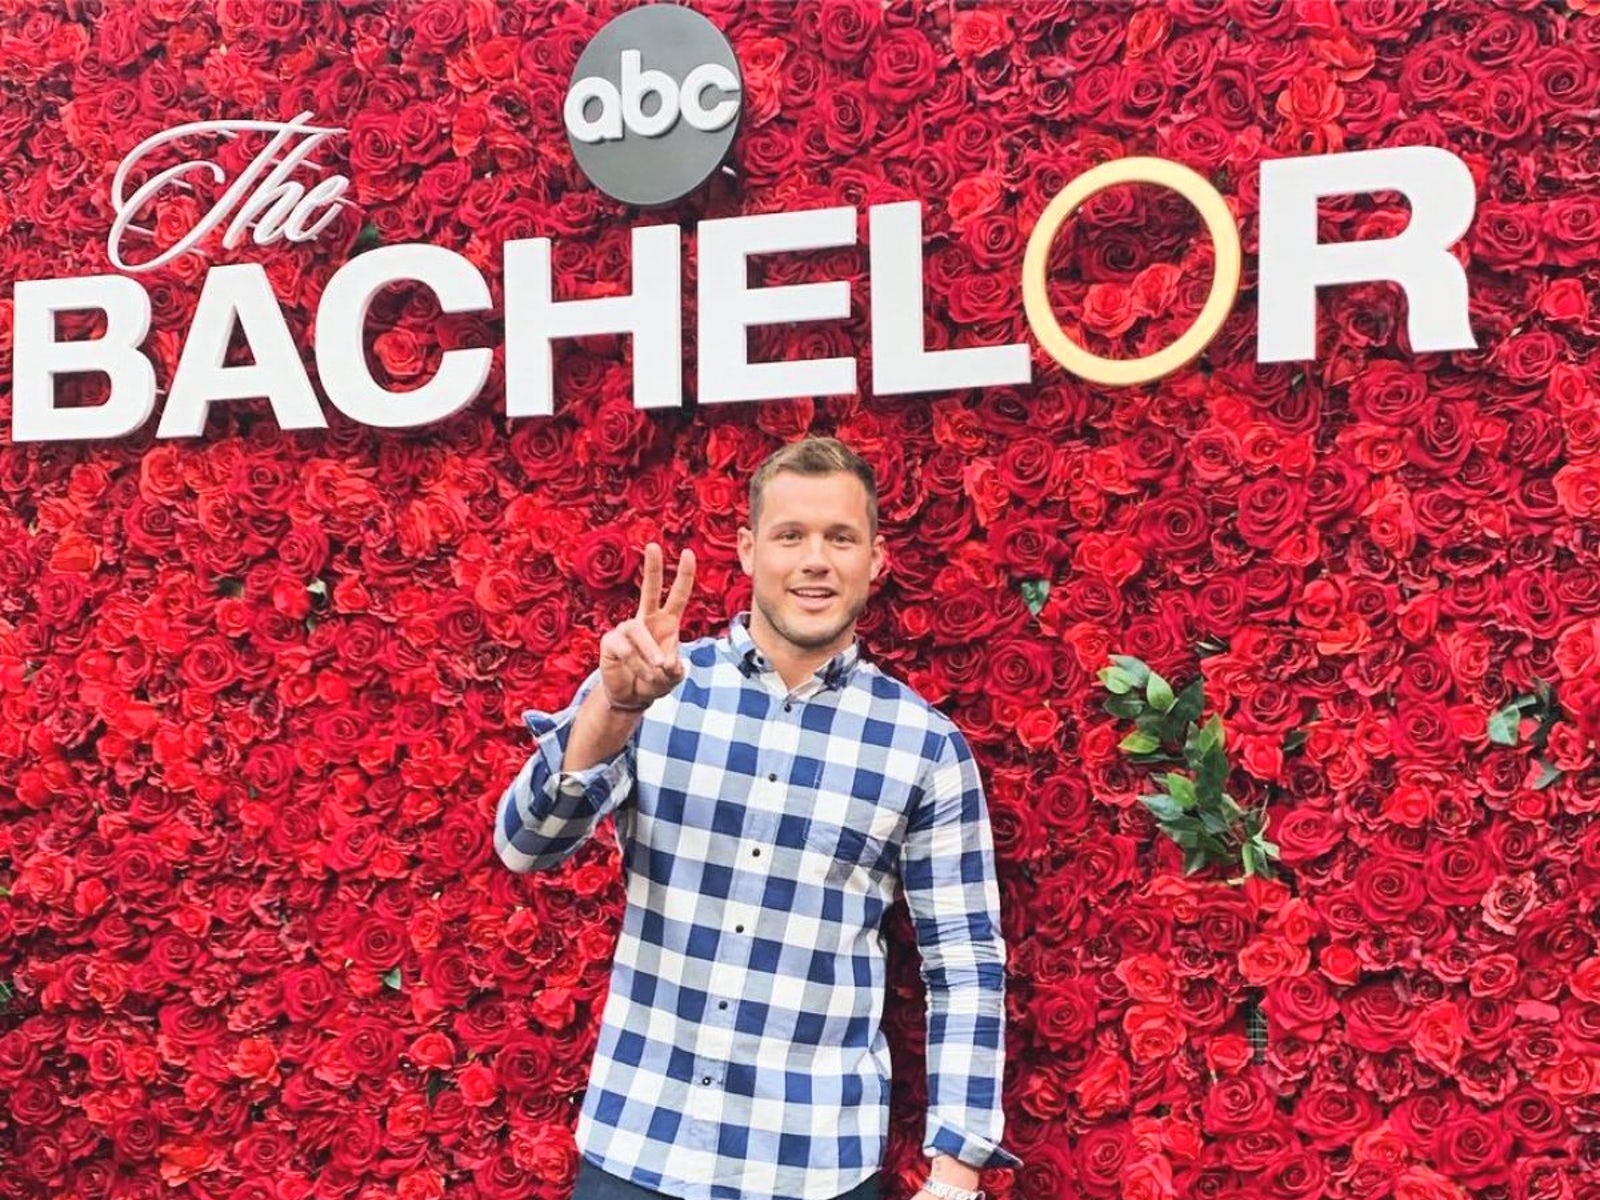 'The Bachelor' spoilers Colton Underwood's winner, Final 3, engagement